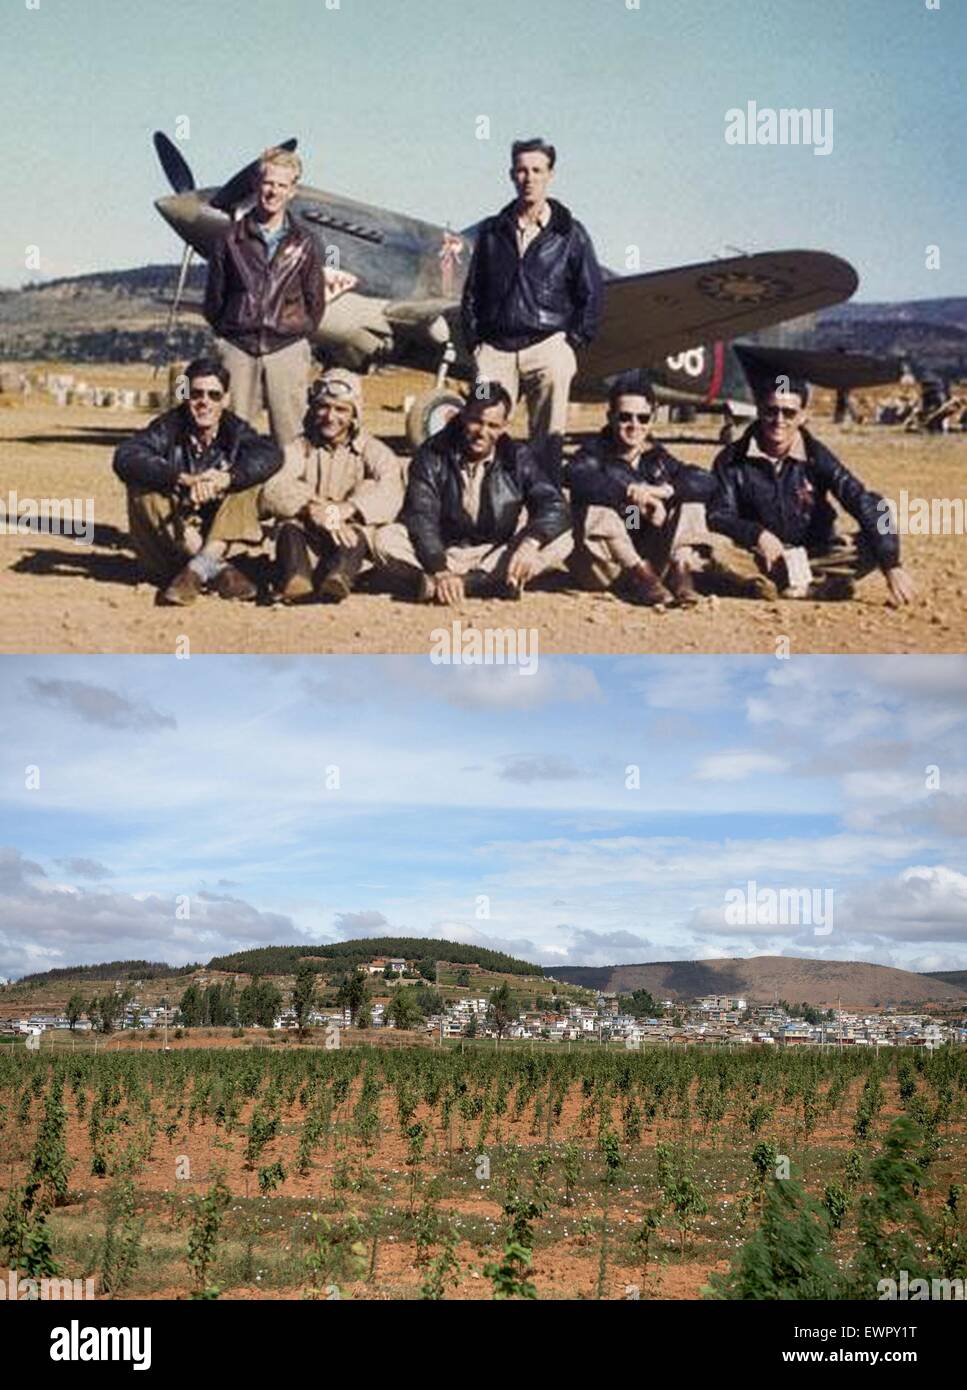 Xiangyun. 29th June, 2015. Combination photo taken during the anti-Japanese War (from 1937 to 1945) and June 29, 2015 (down) shows a contrast of view of 'Yunanyi Airport' where the American Volunteer Group (AVG) stationed during the wartime in Xiangyun County, southwest China's Yunnan Province. The 'Yunnanyi Airport' was used as an airbase by the AVG, which is popular known as the 'Flying Tigers', led by U.S. General Claire Lee Chennault to help the Chinese fight against Japanese air forces. © Liu Chan/Xinhua/Alamy Live News Stock Photo